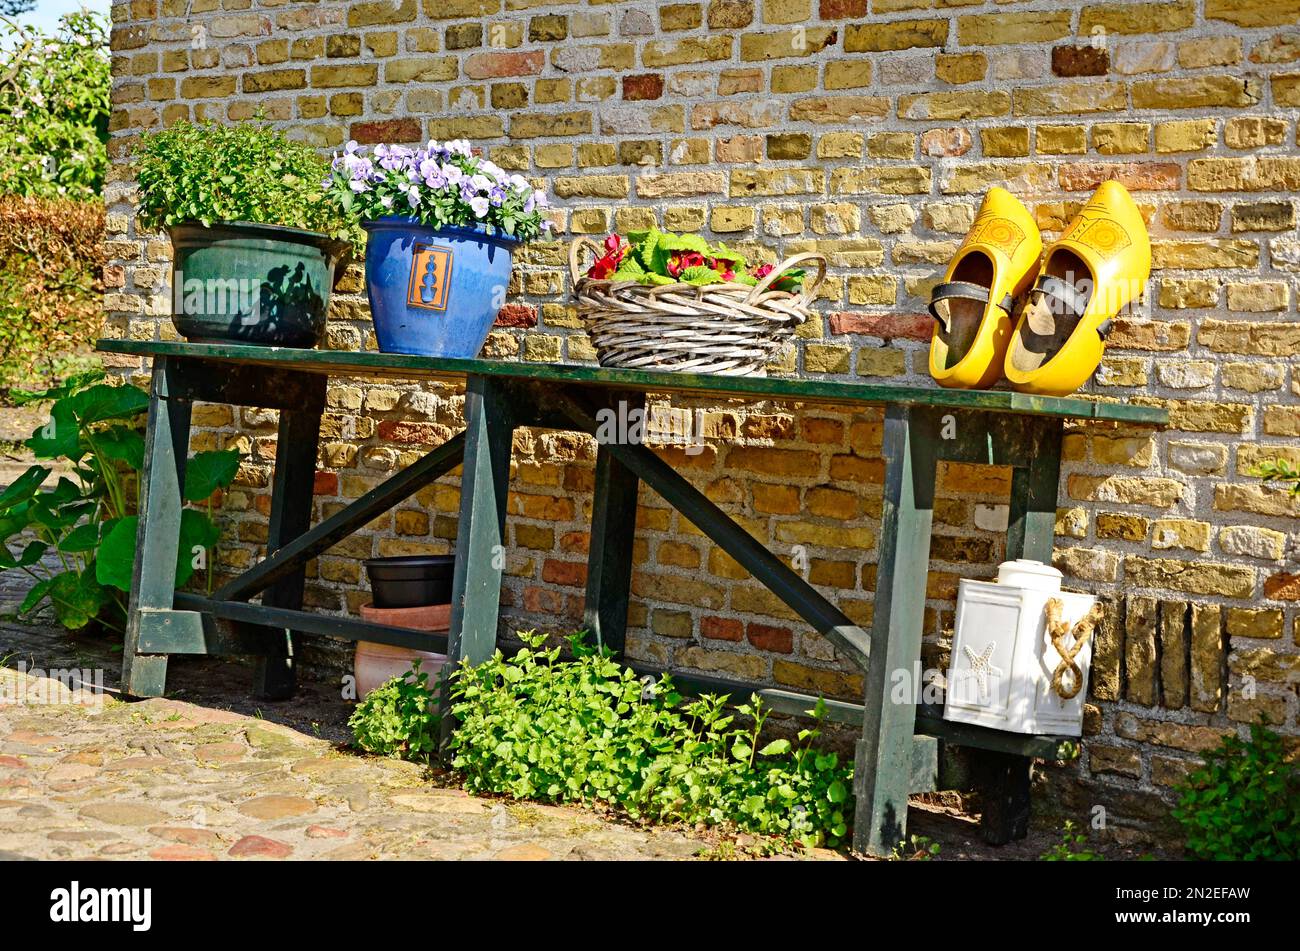 Street decoration on a green table in Bourtange Fortress, Netherlands Stock Photo